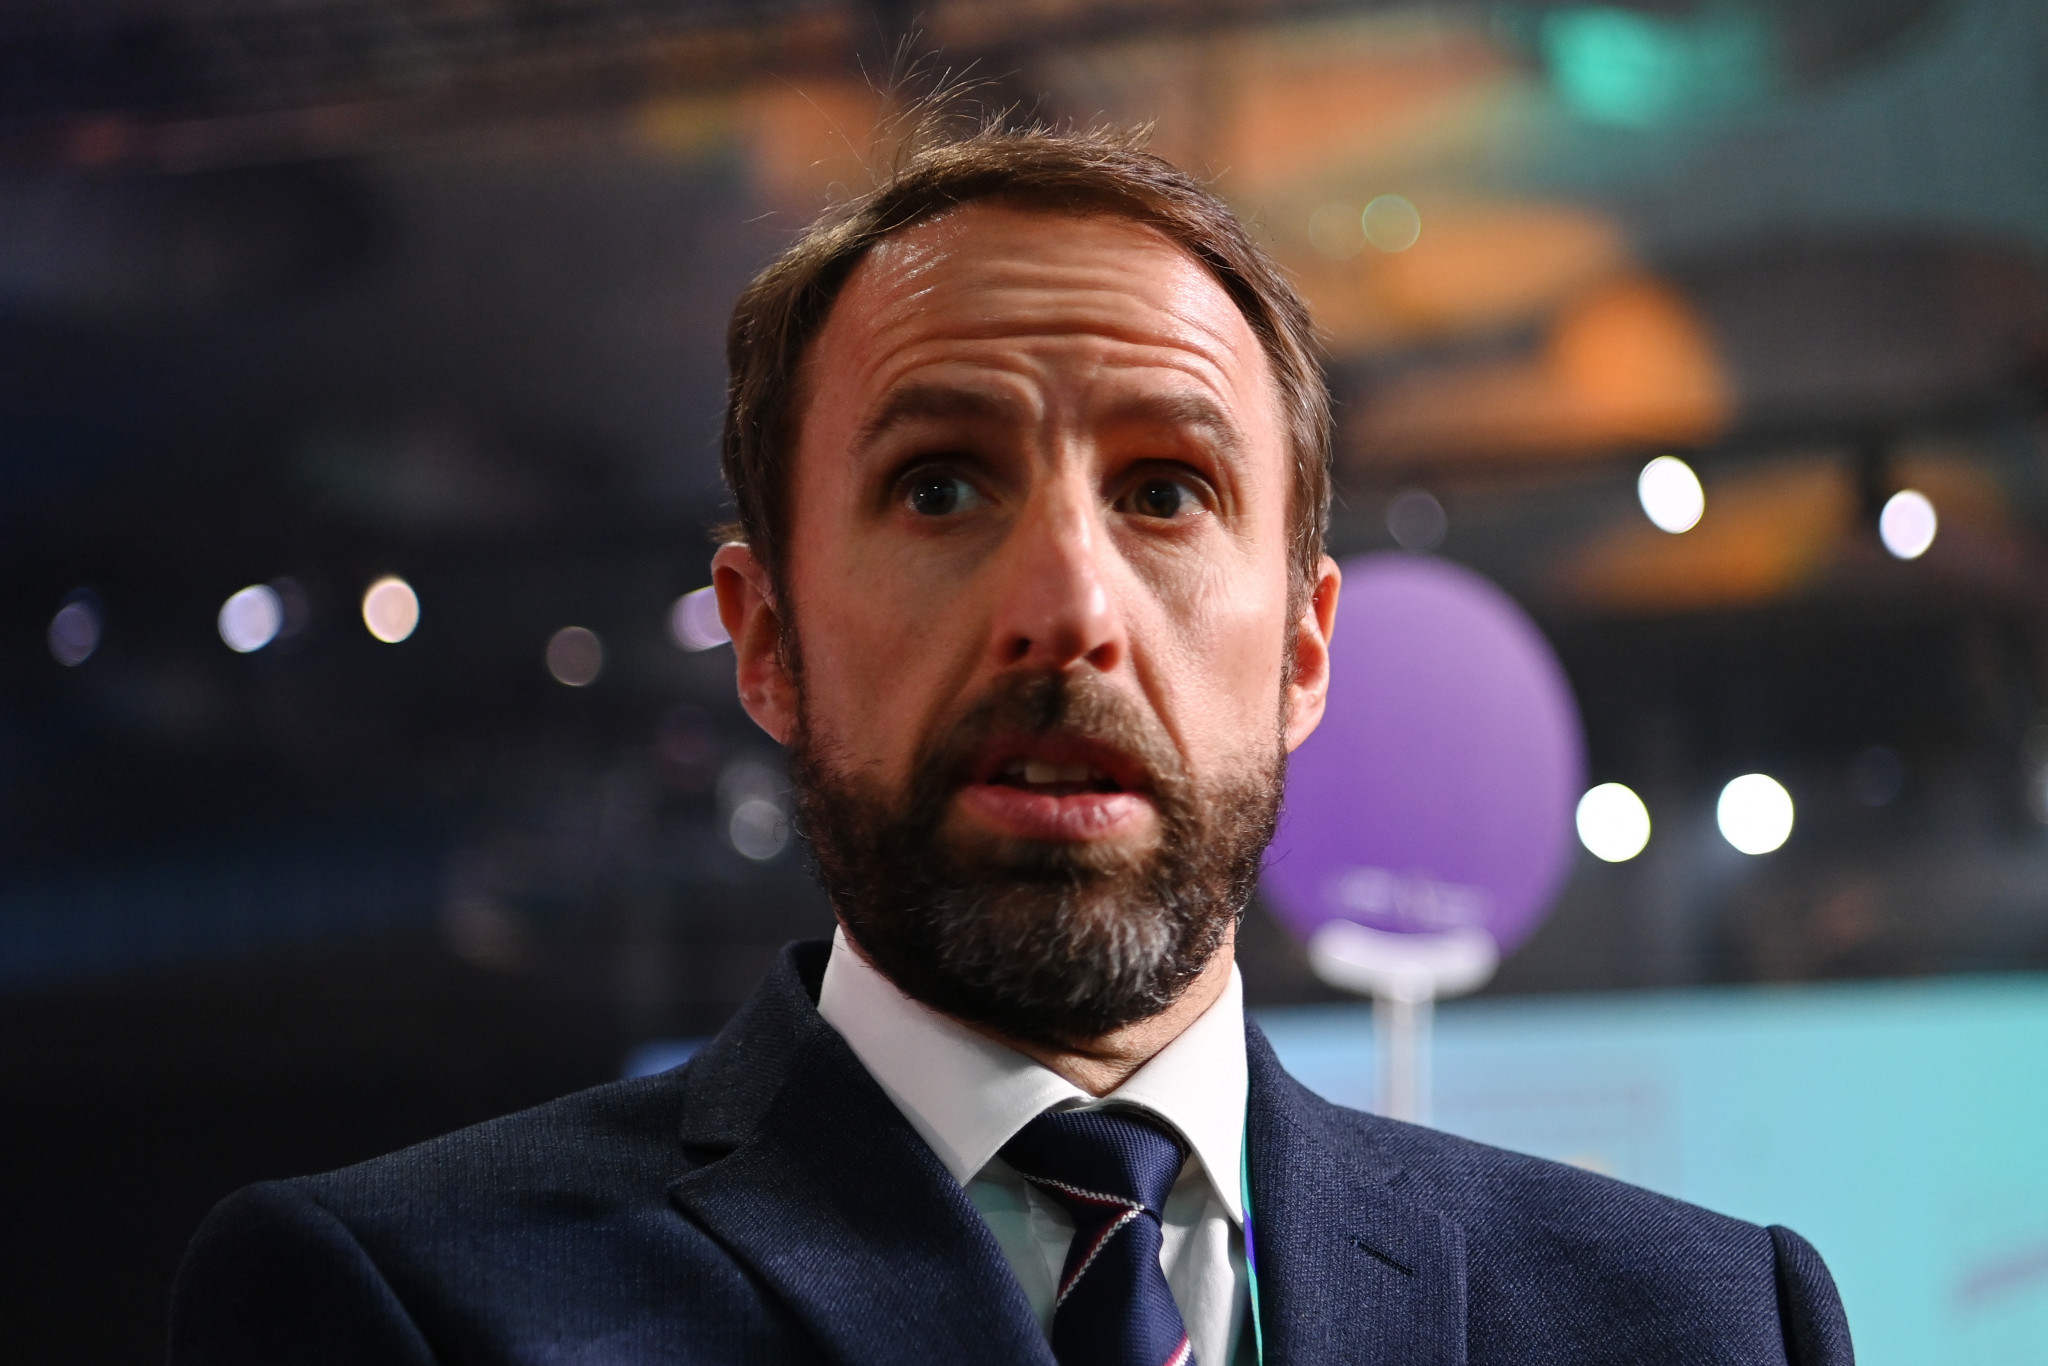 Qatar 2022 official calls for Southgate meeting to discuss FIFA World Cup concerns